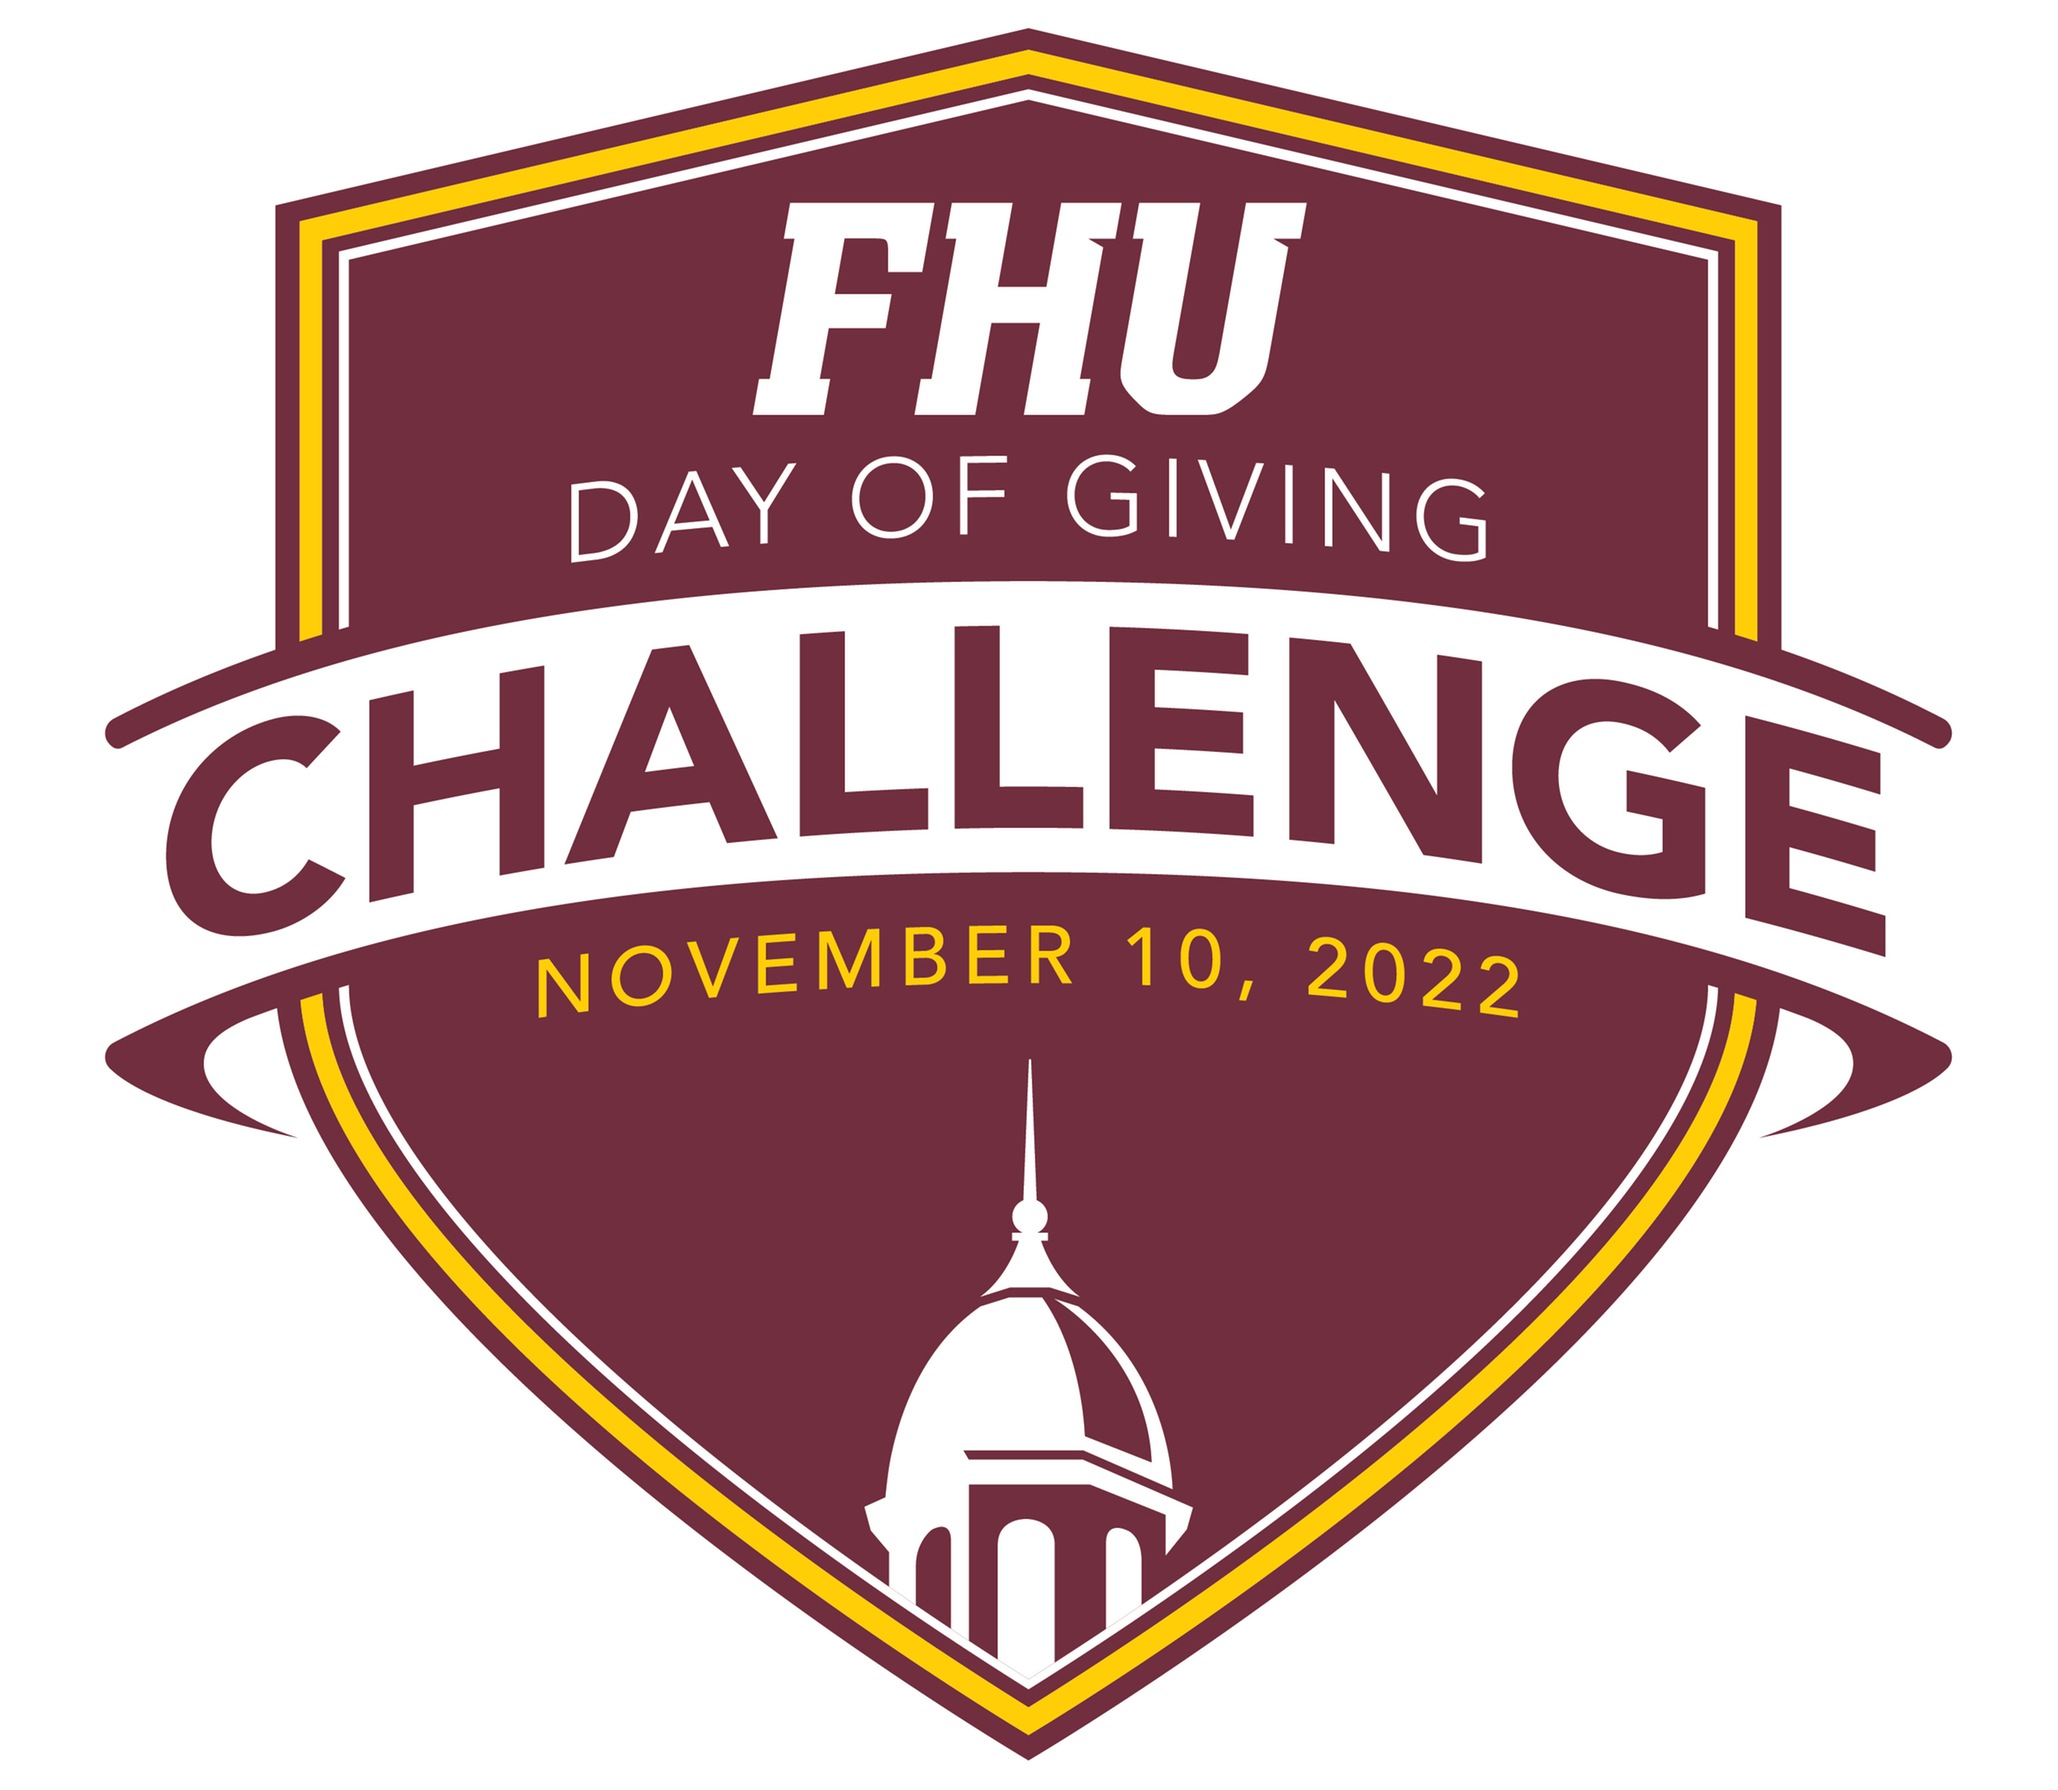 FHU Day of Giving 2022